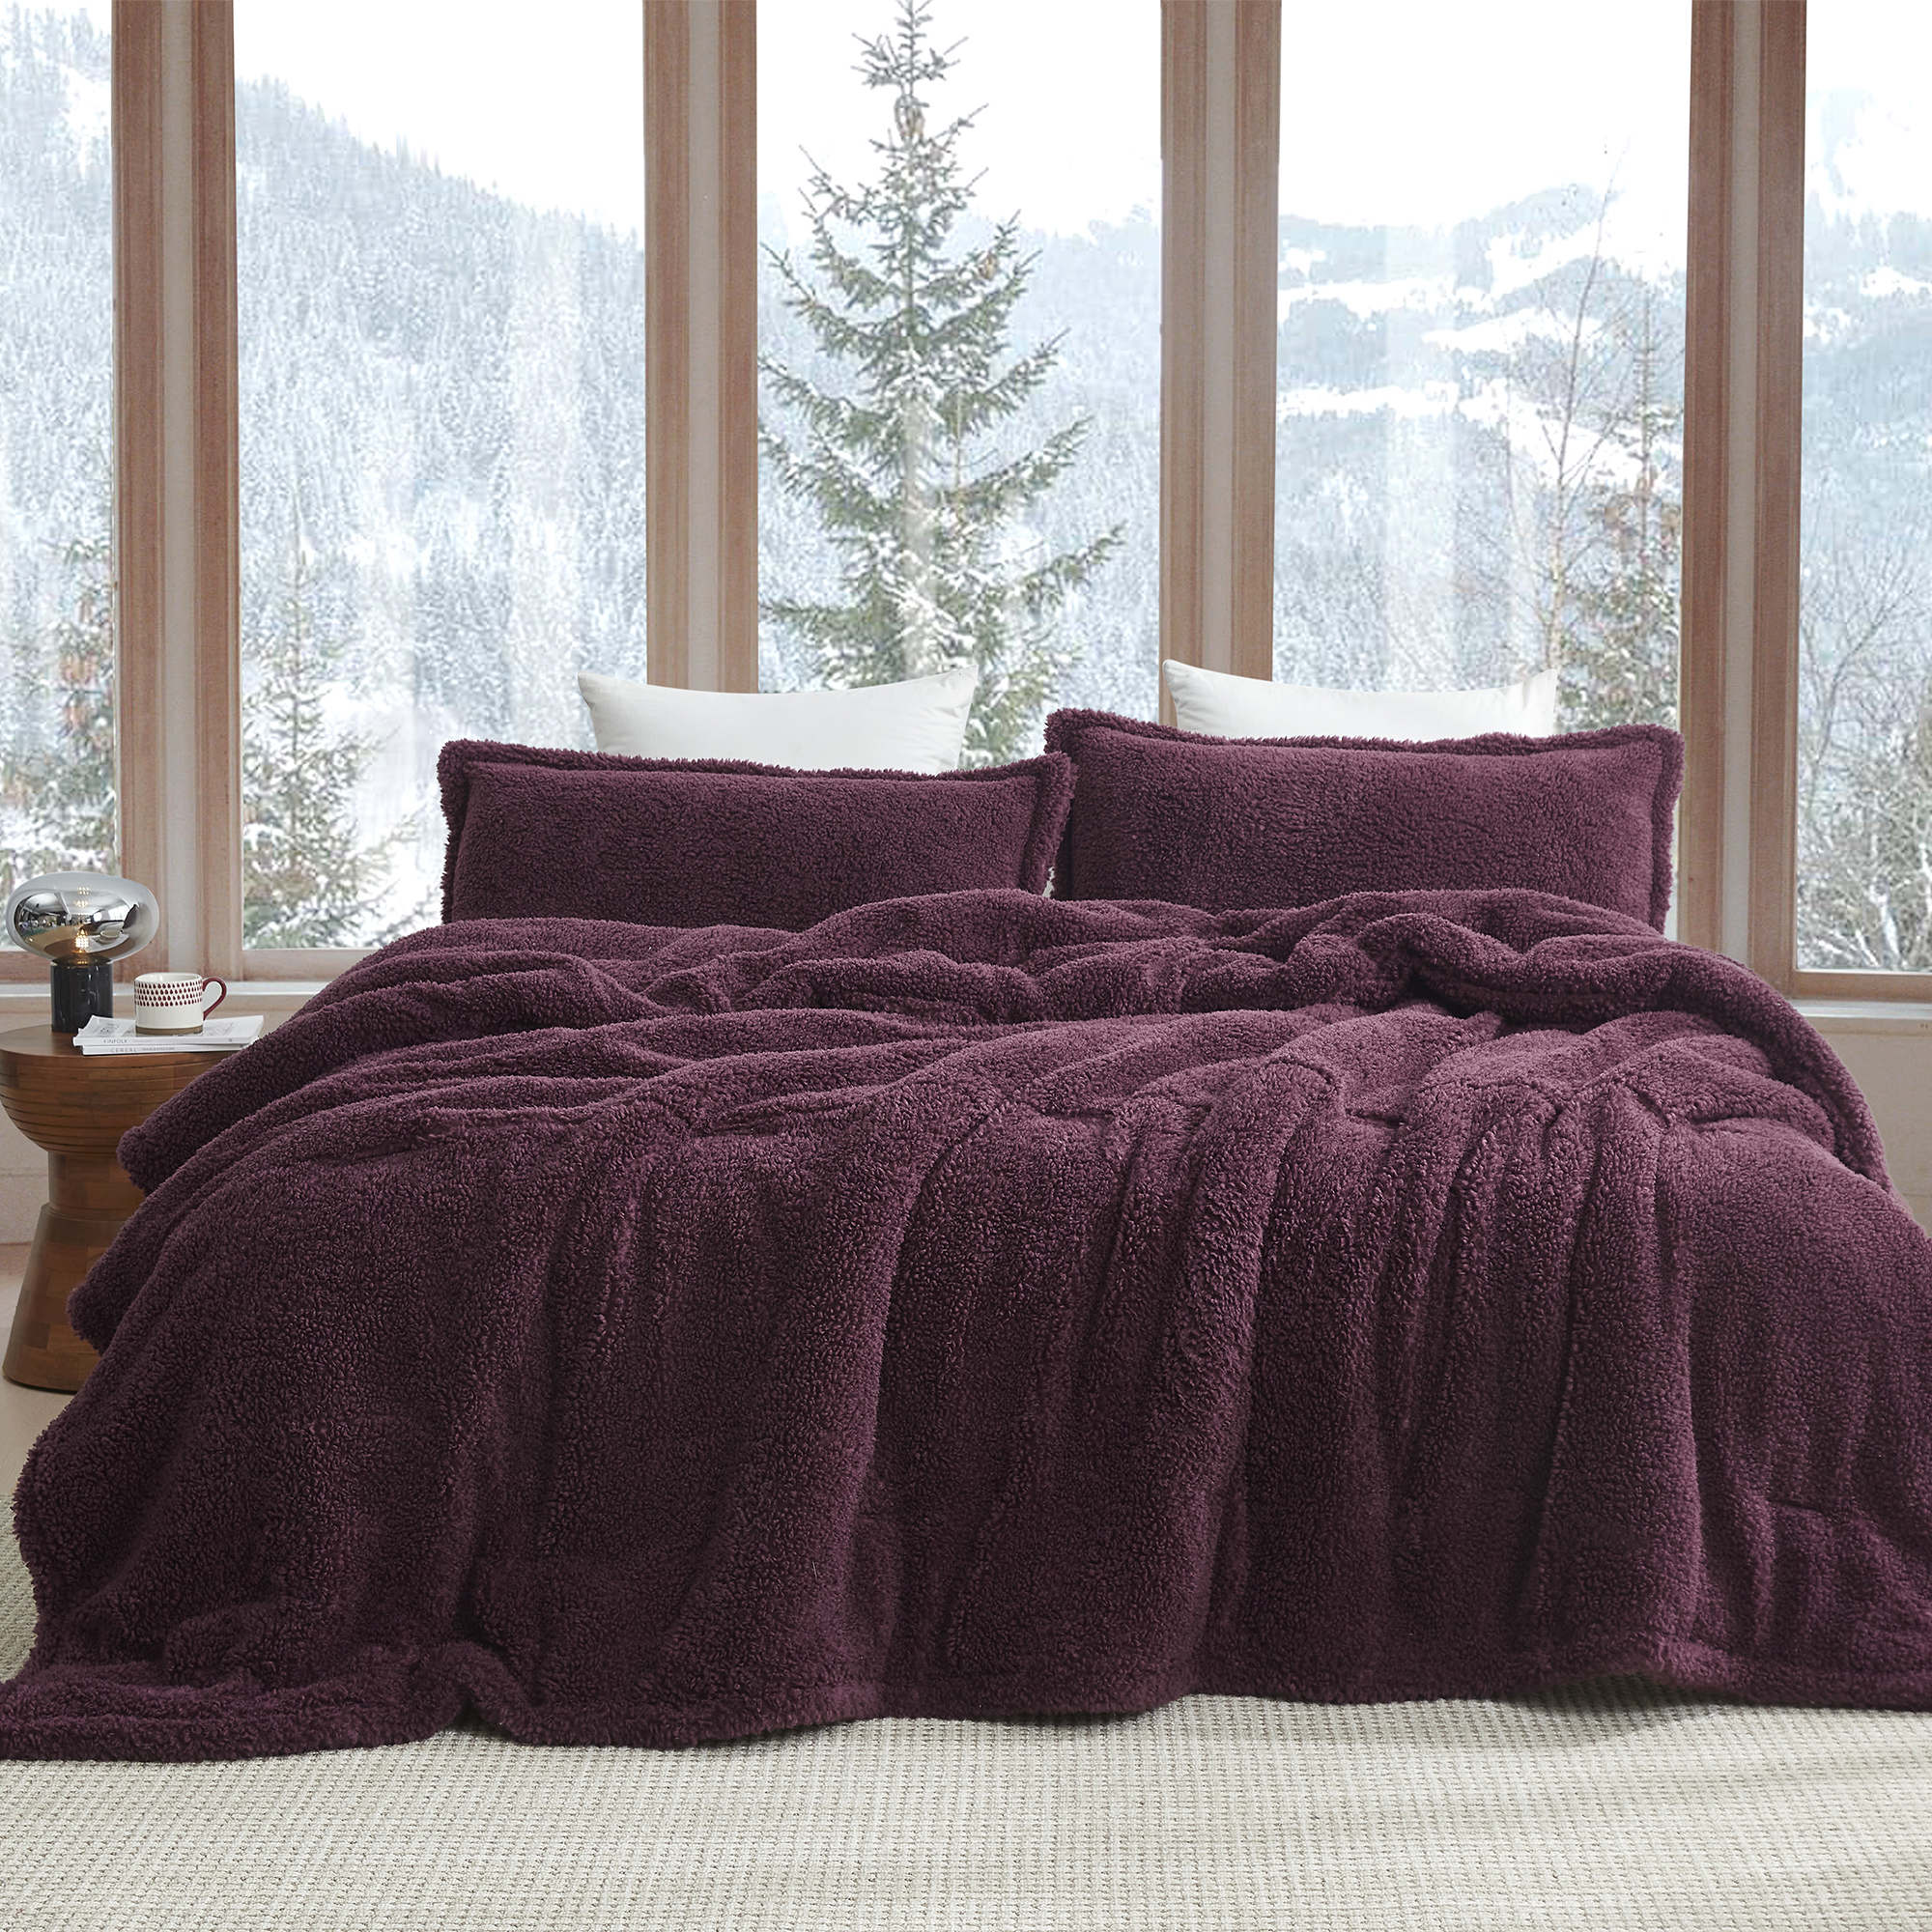 Unfluffin Believable - Coma Inducer® Oversized King Comforter - Burgundy